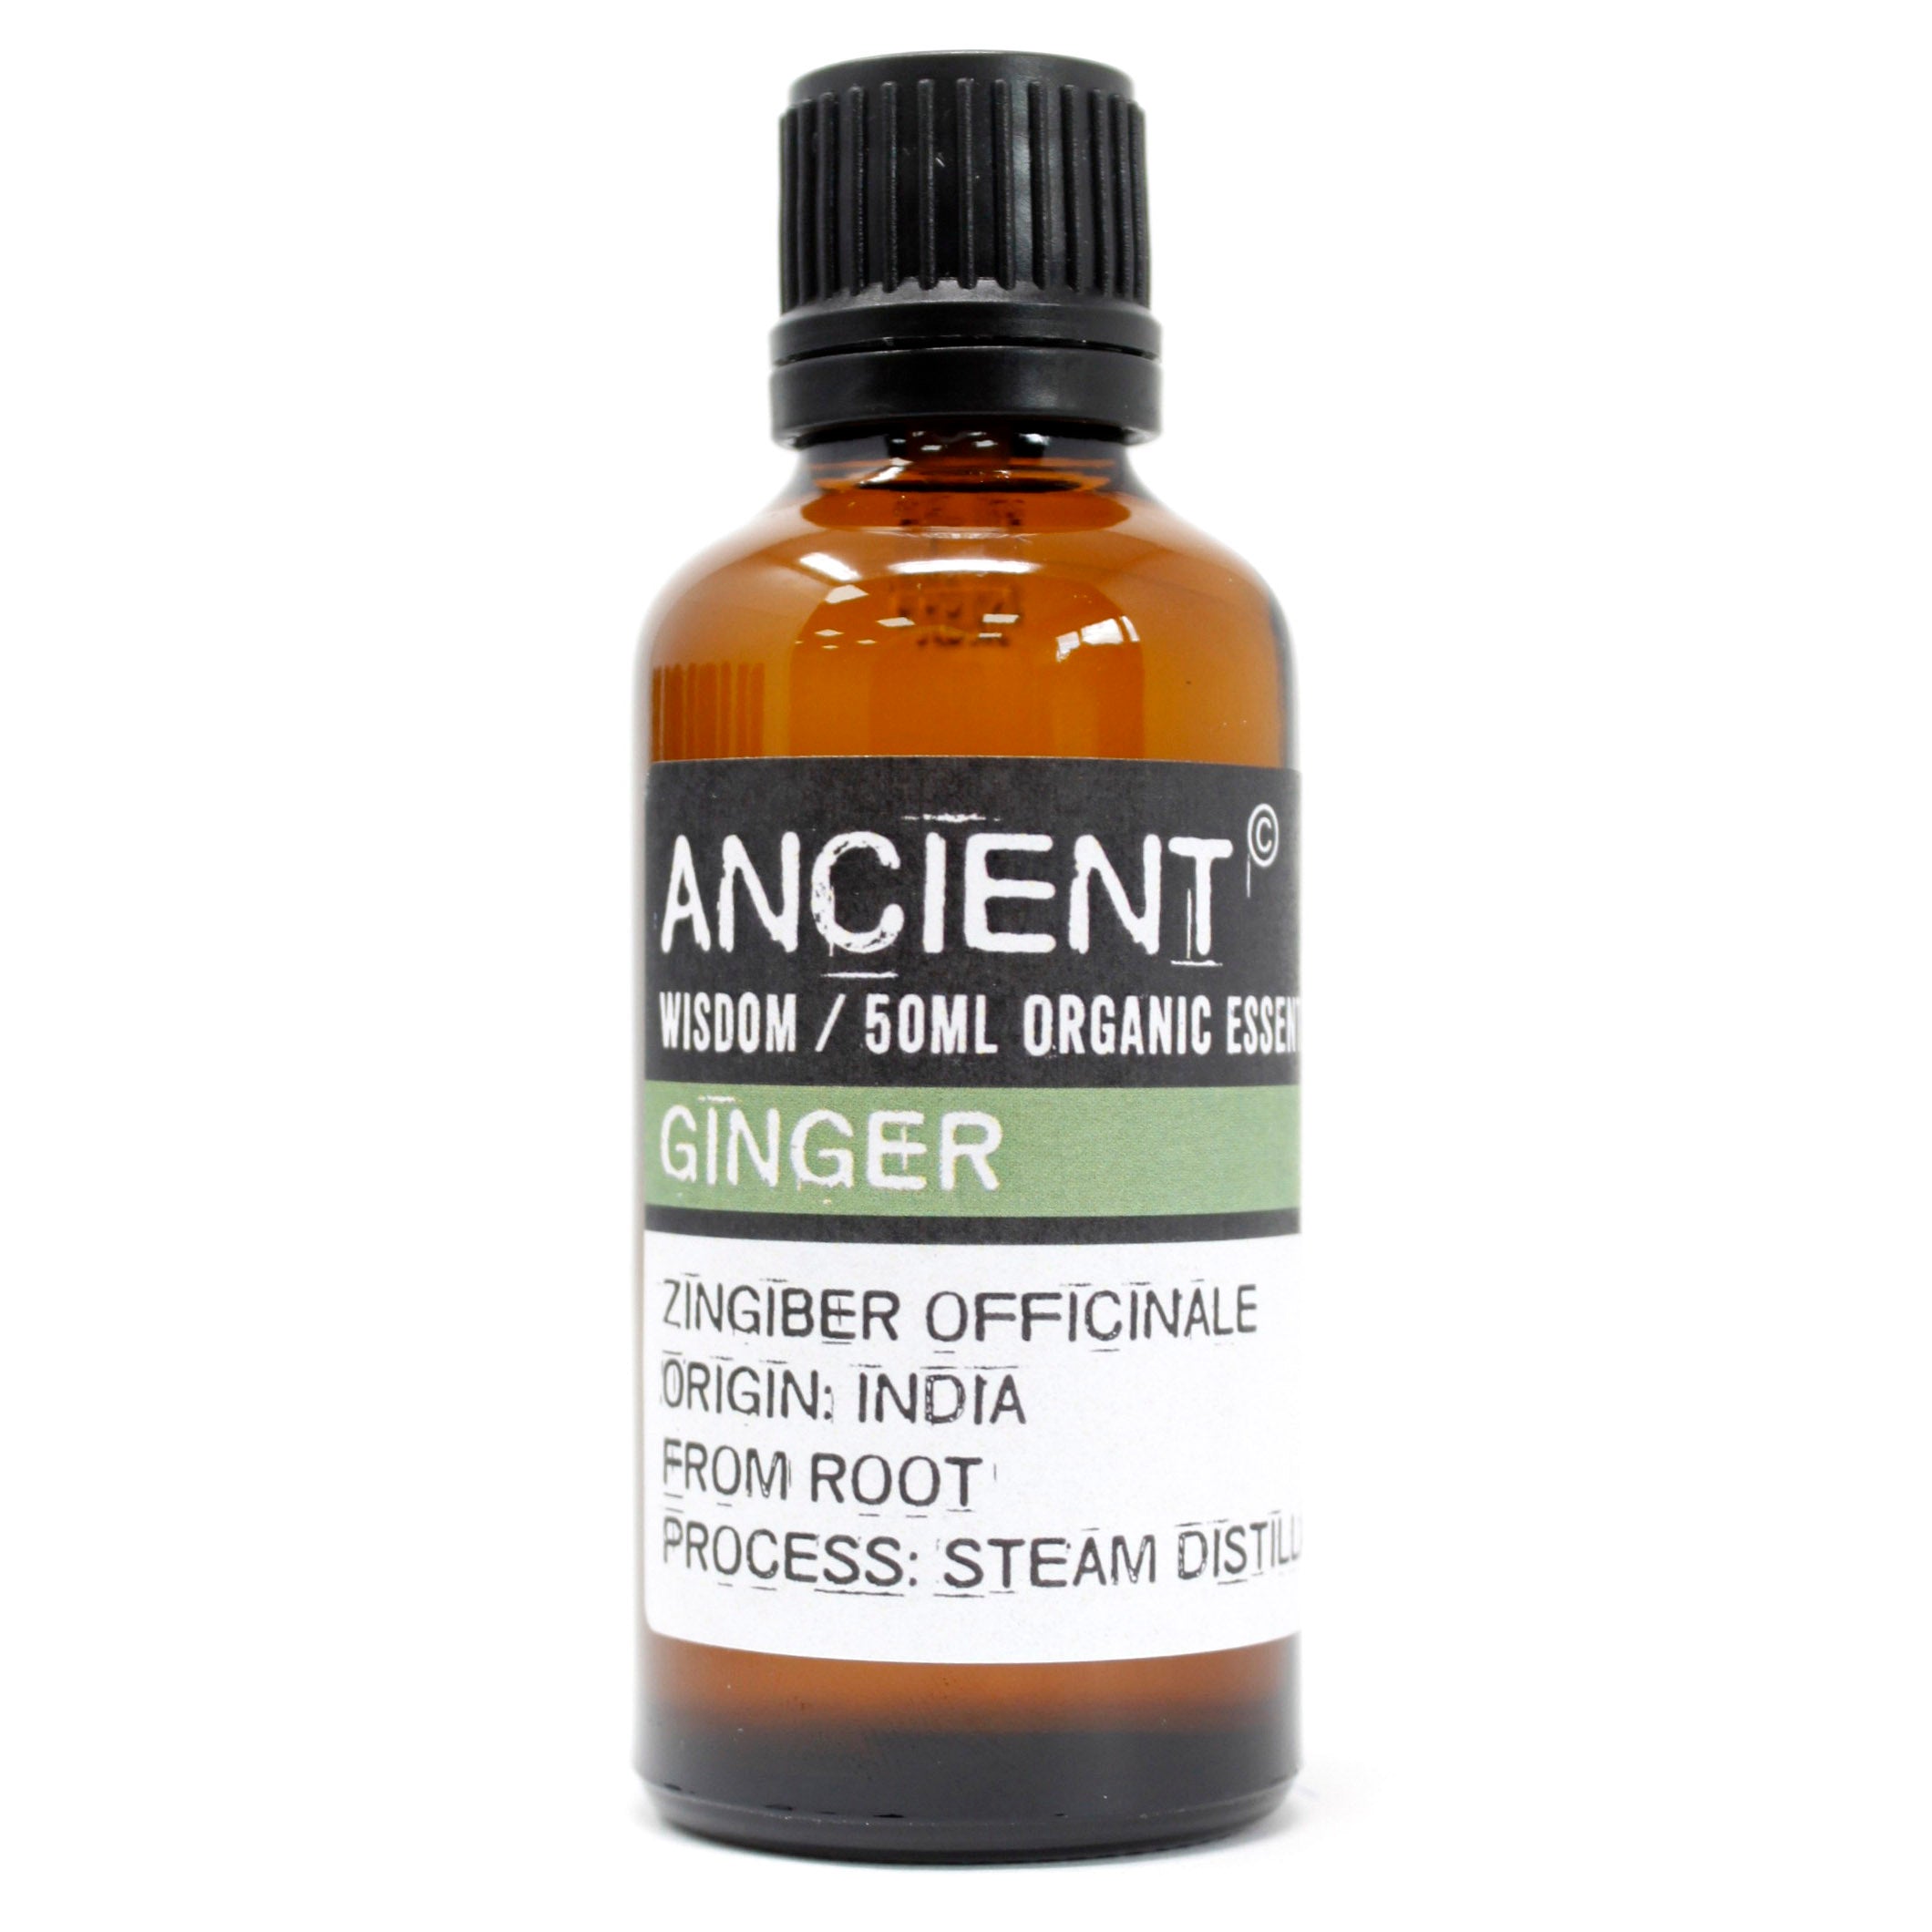 View Ginger Organic Essential Oil 50ml information